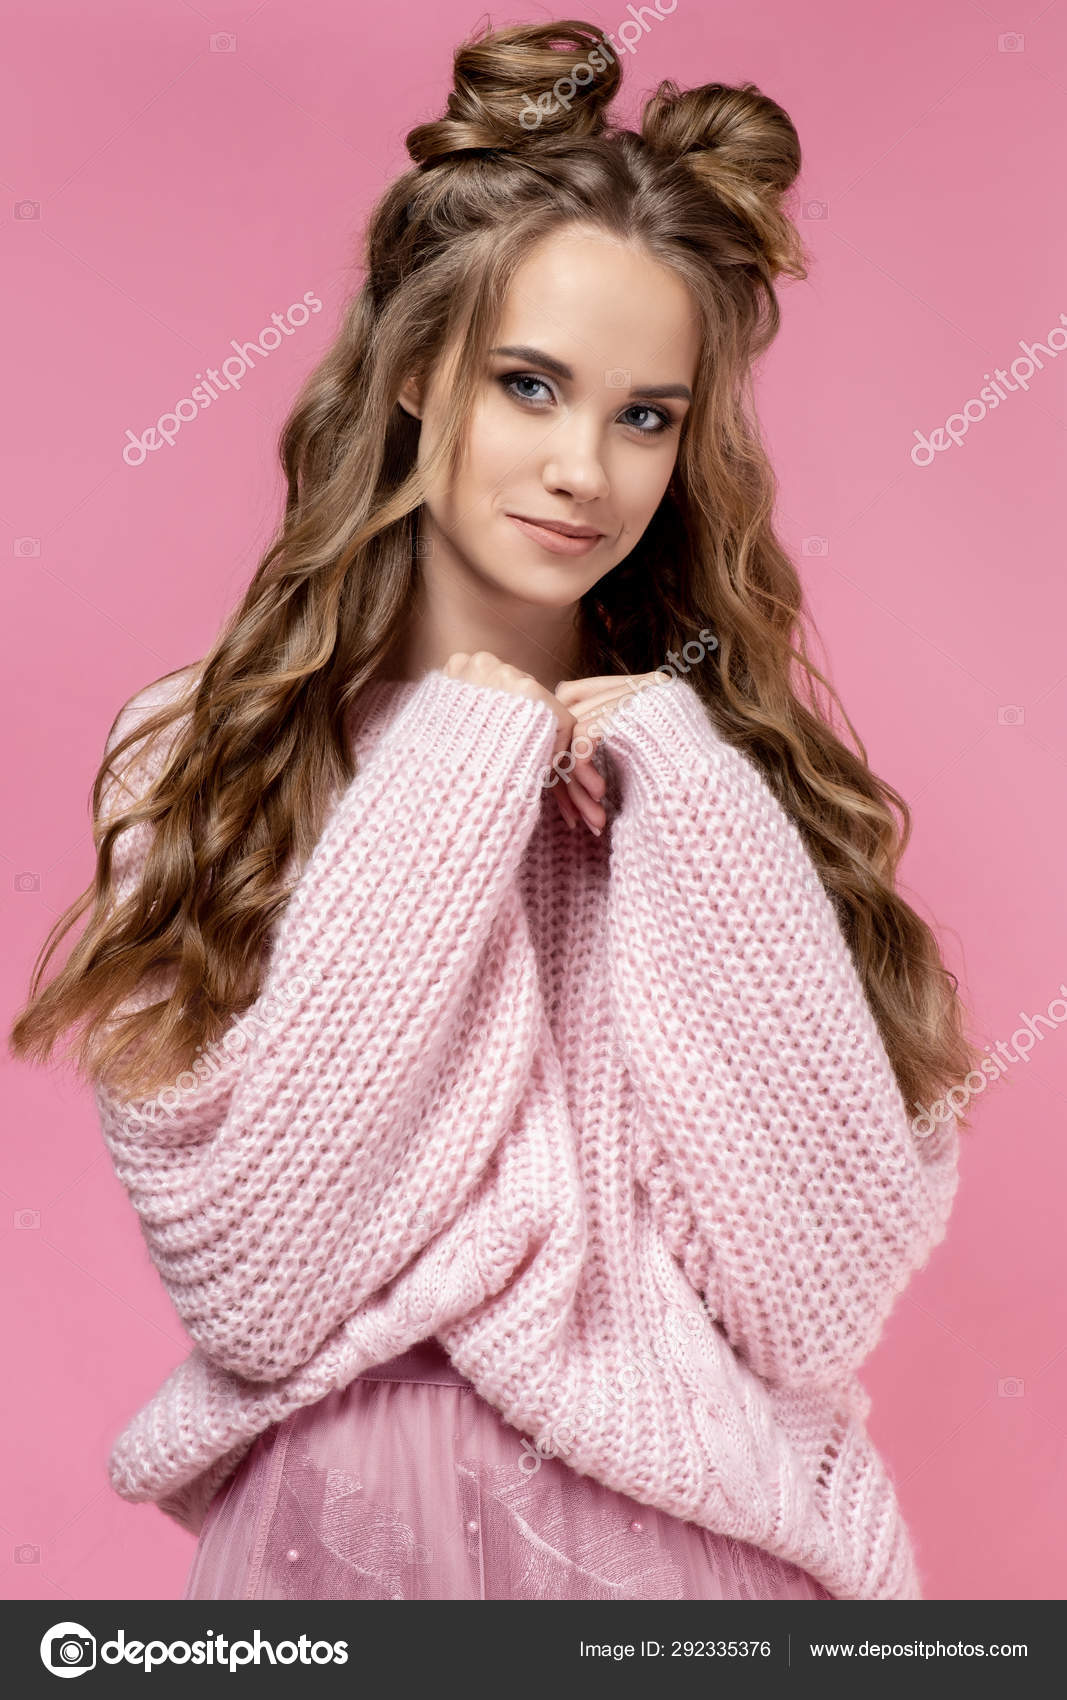 Pretty Young Girl Pink Sweater Pink Background Haircut Curly